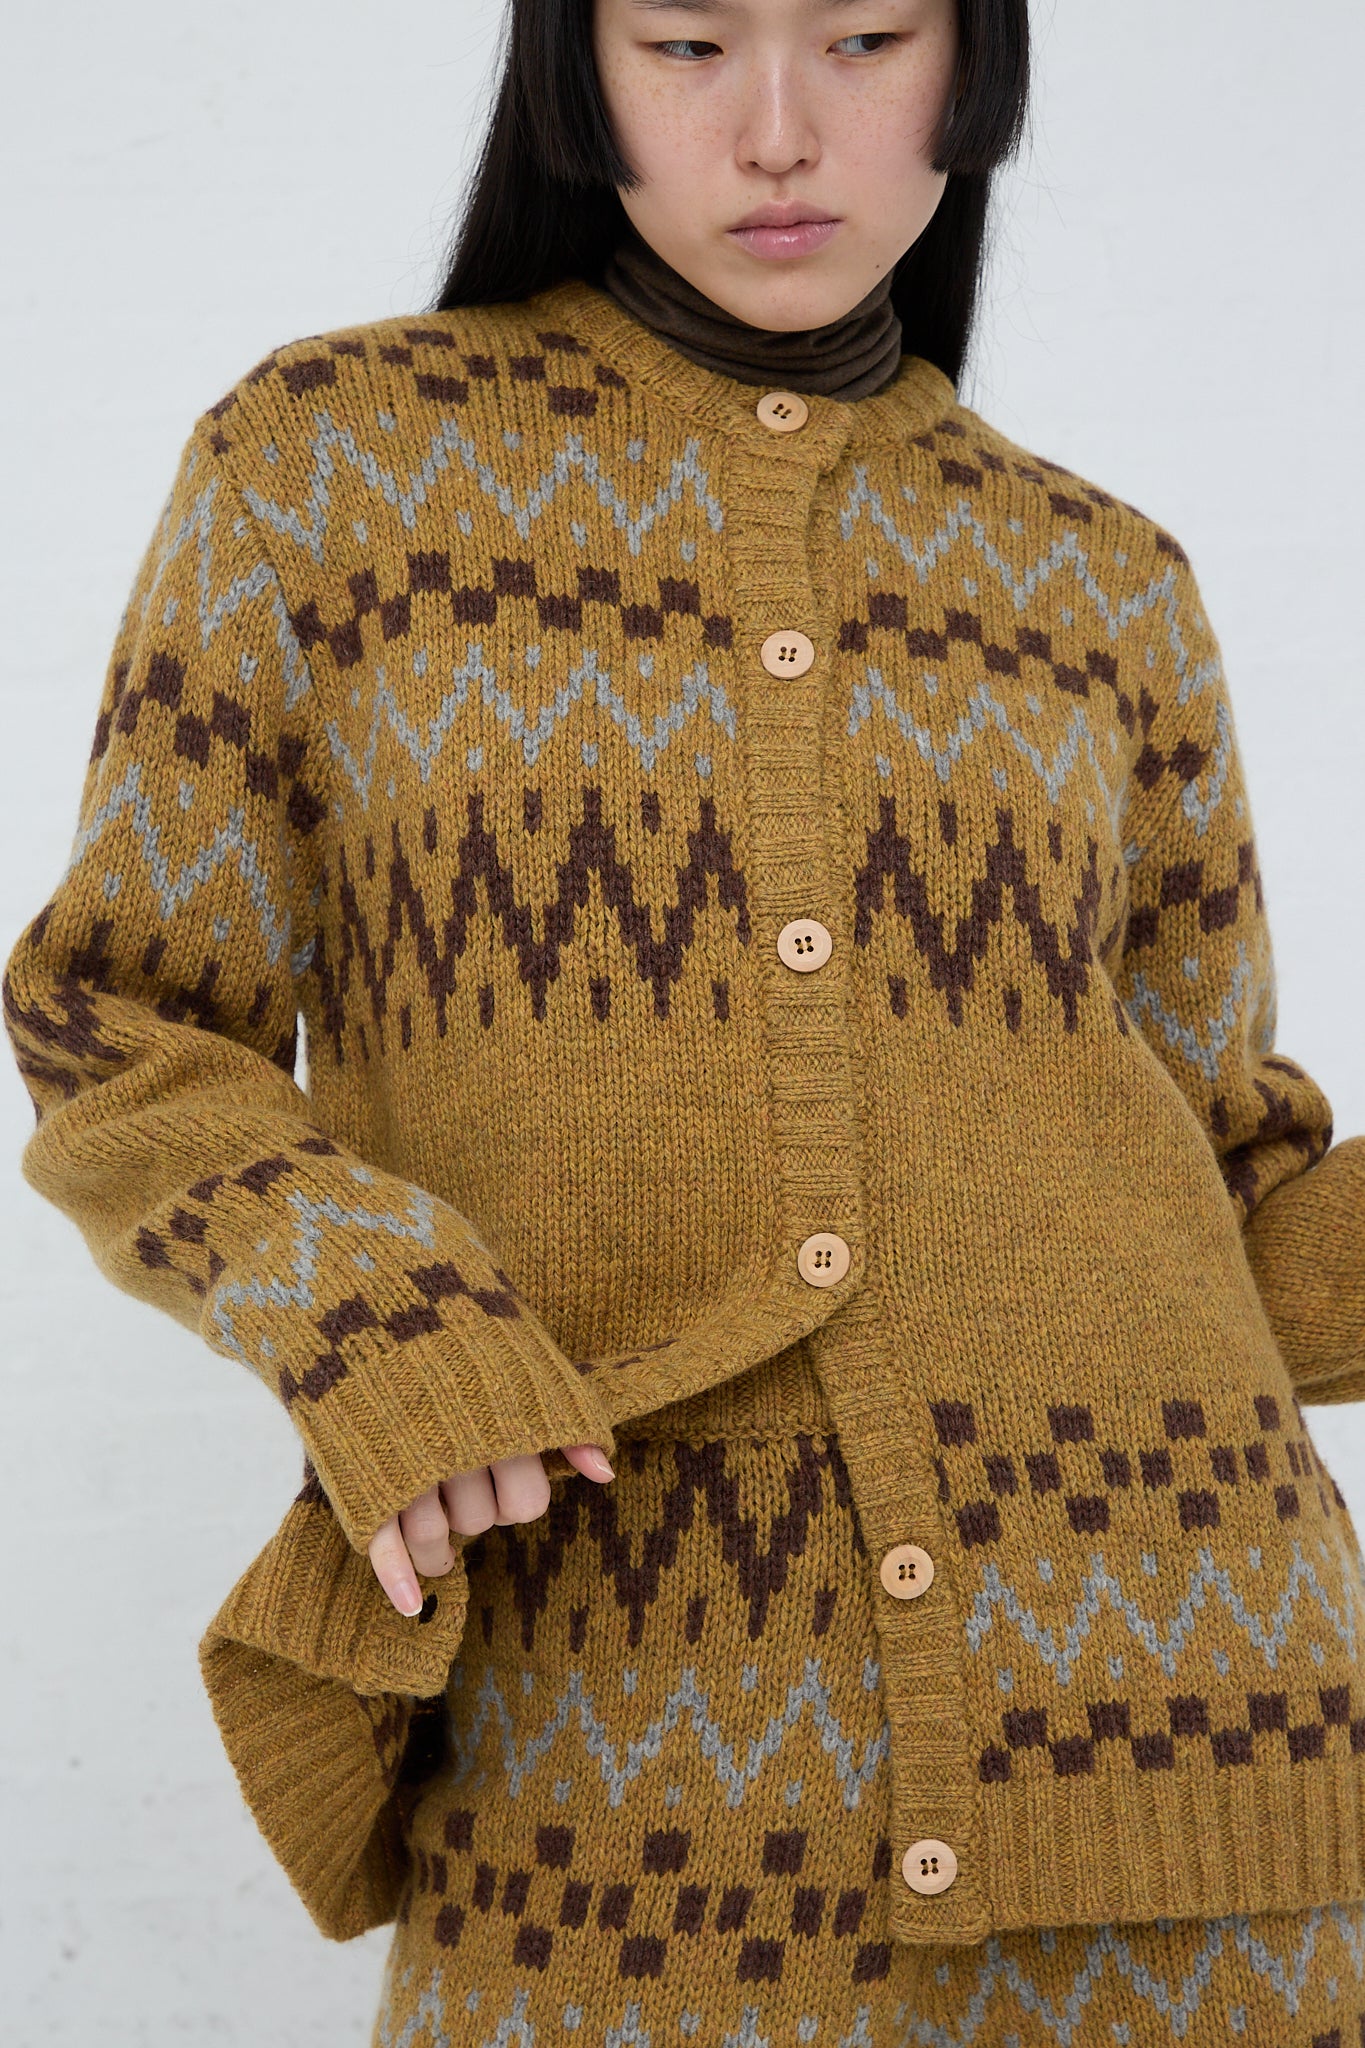 A model wearing an Ichi Wool Knit Cardigan in Camel in a multi-color design.